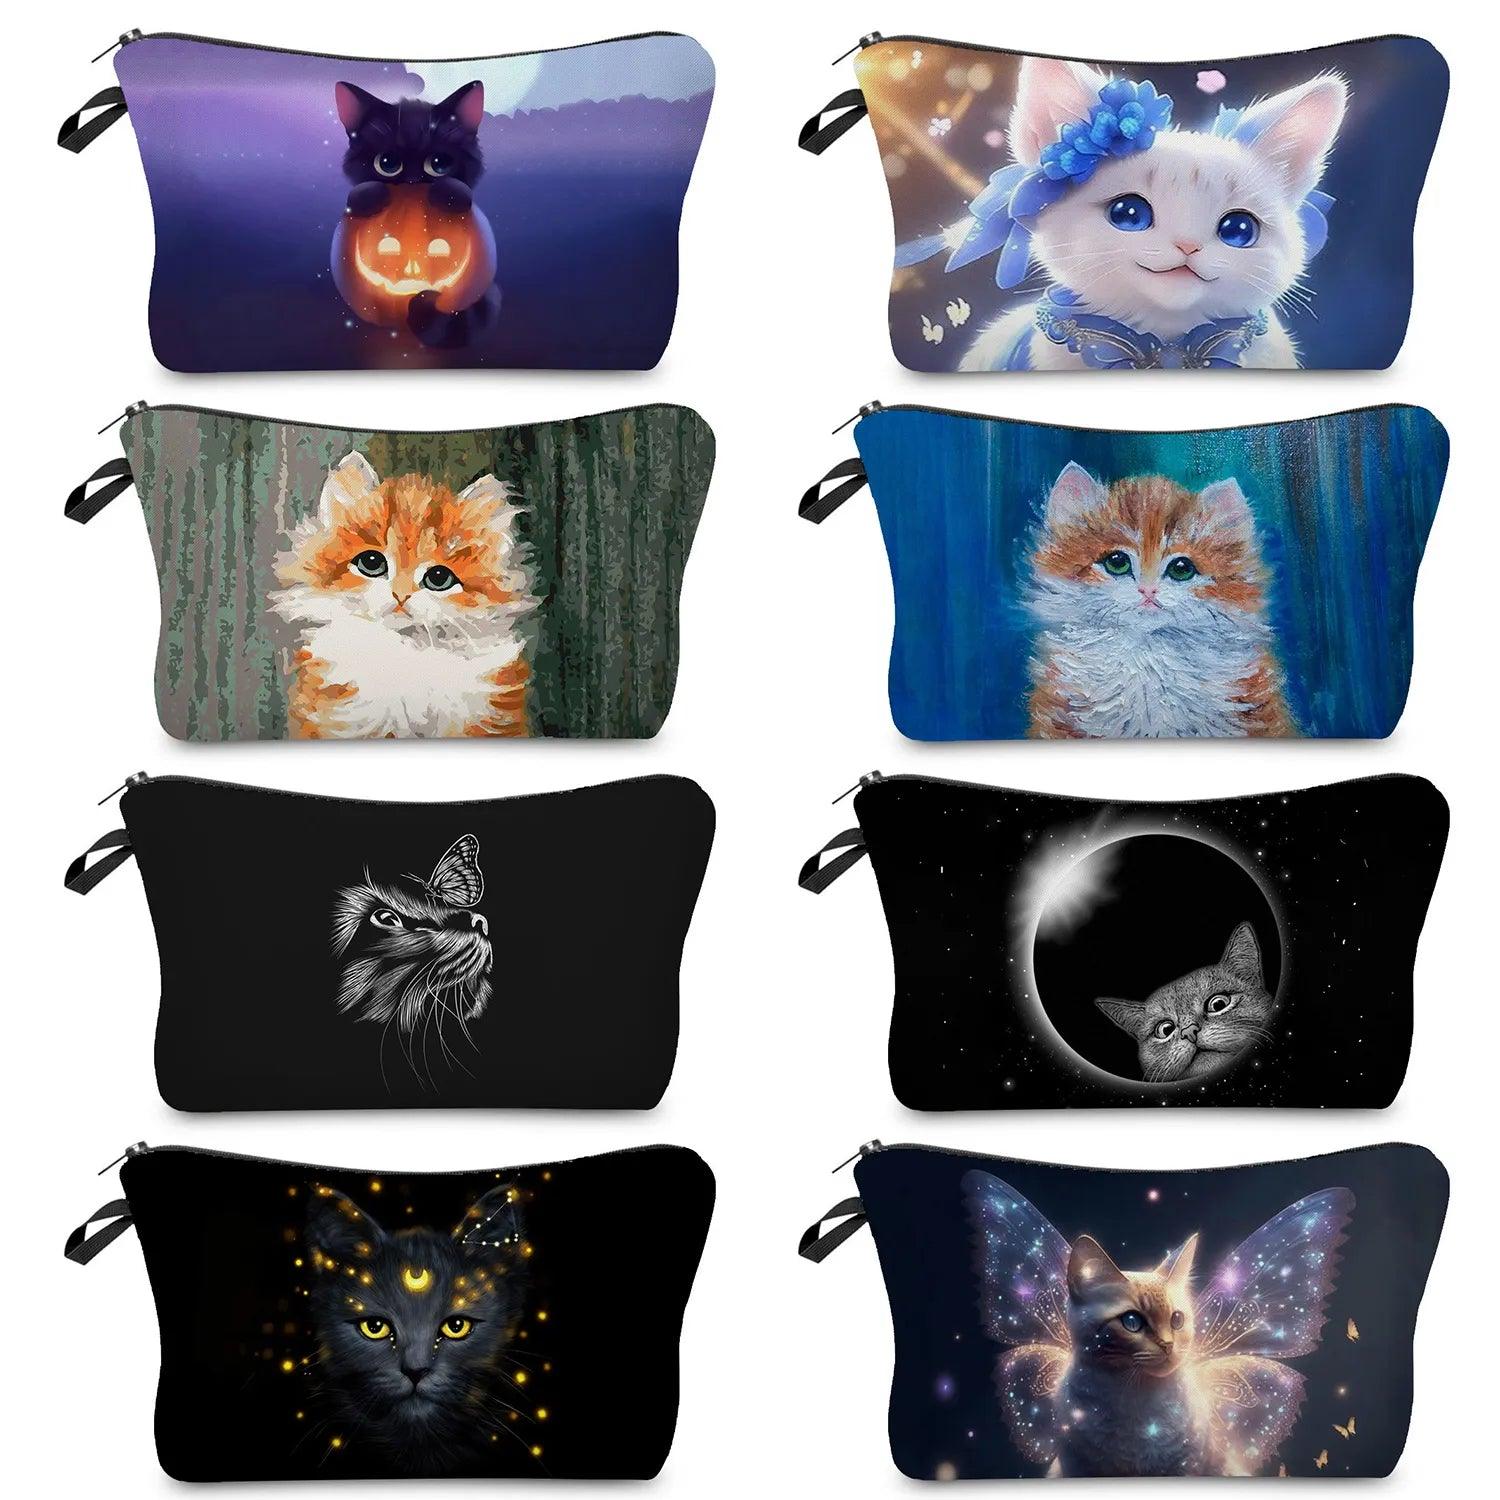 Colurful Cat printed travel Pouche/Cosmetic bag, 24 Designs - Just Cats - Gifts for Cat Lovers